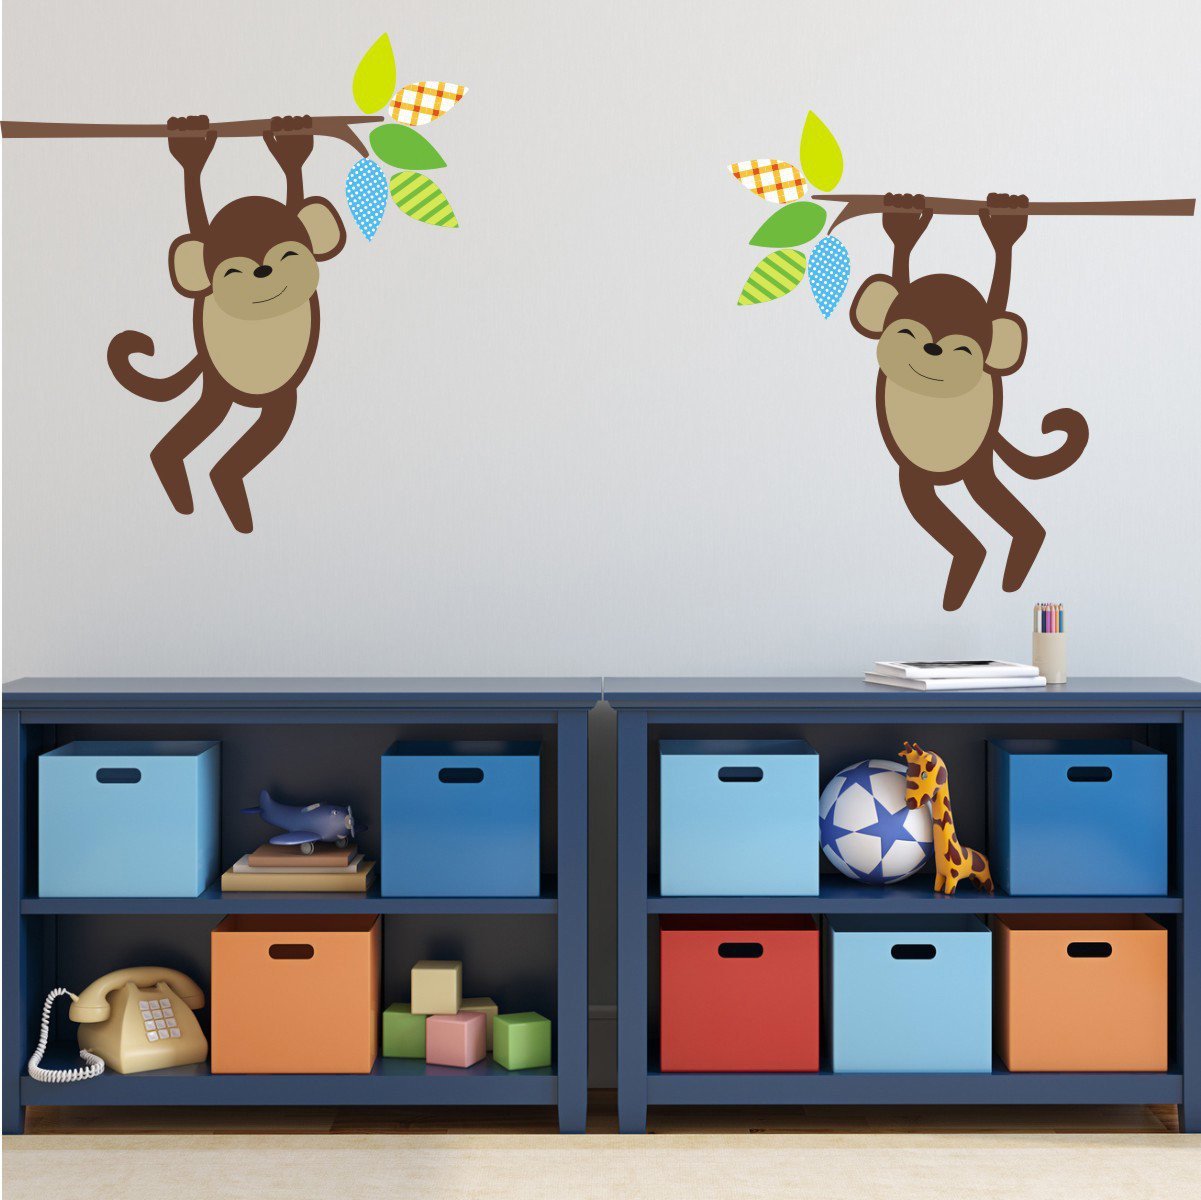 Monkey Wall Decals, Jungle Monkey Wall Stickers, Nursery Wall Decals,  Repositionable Fabric Decals